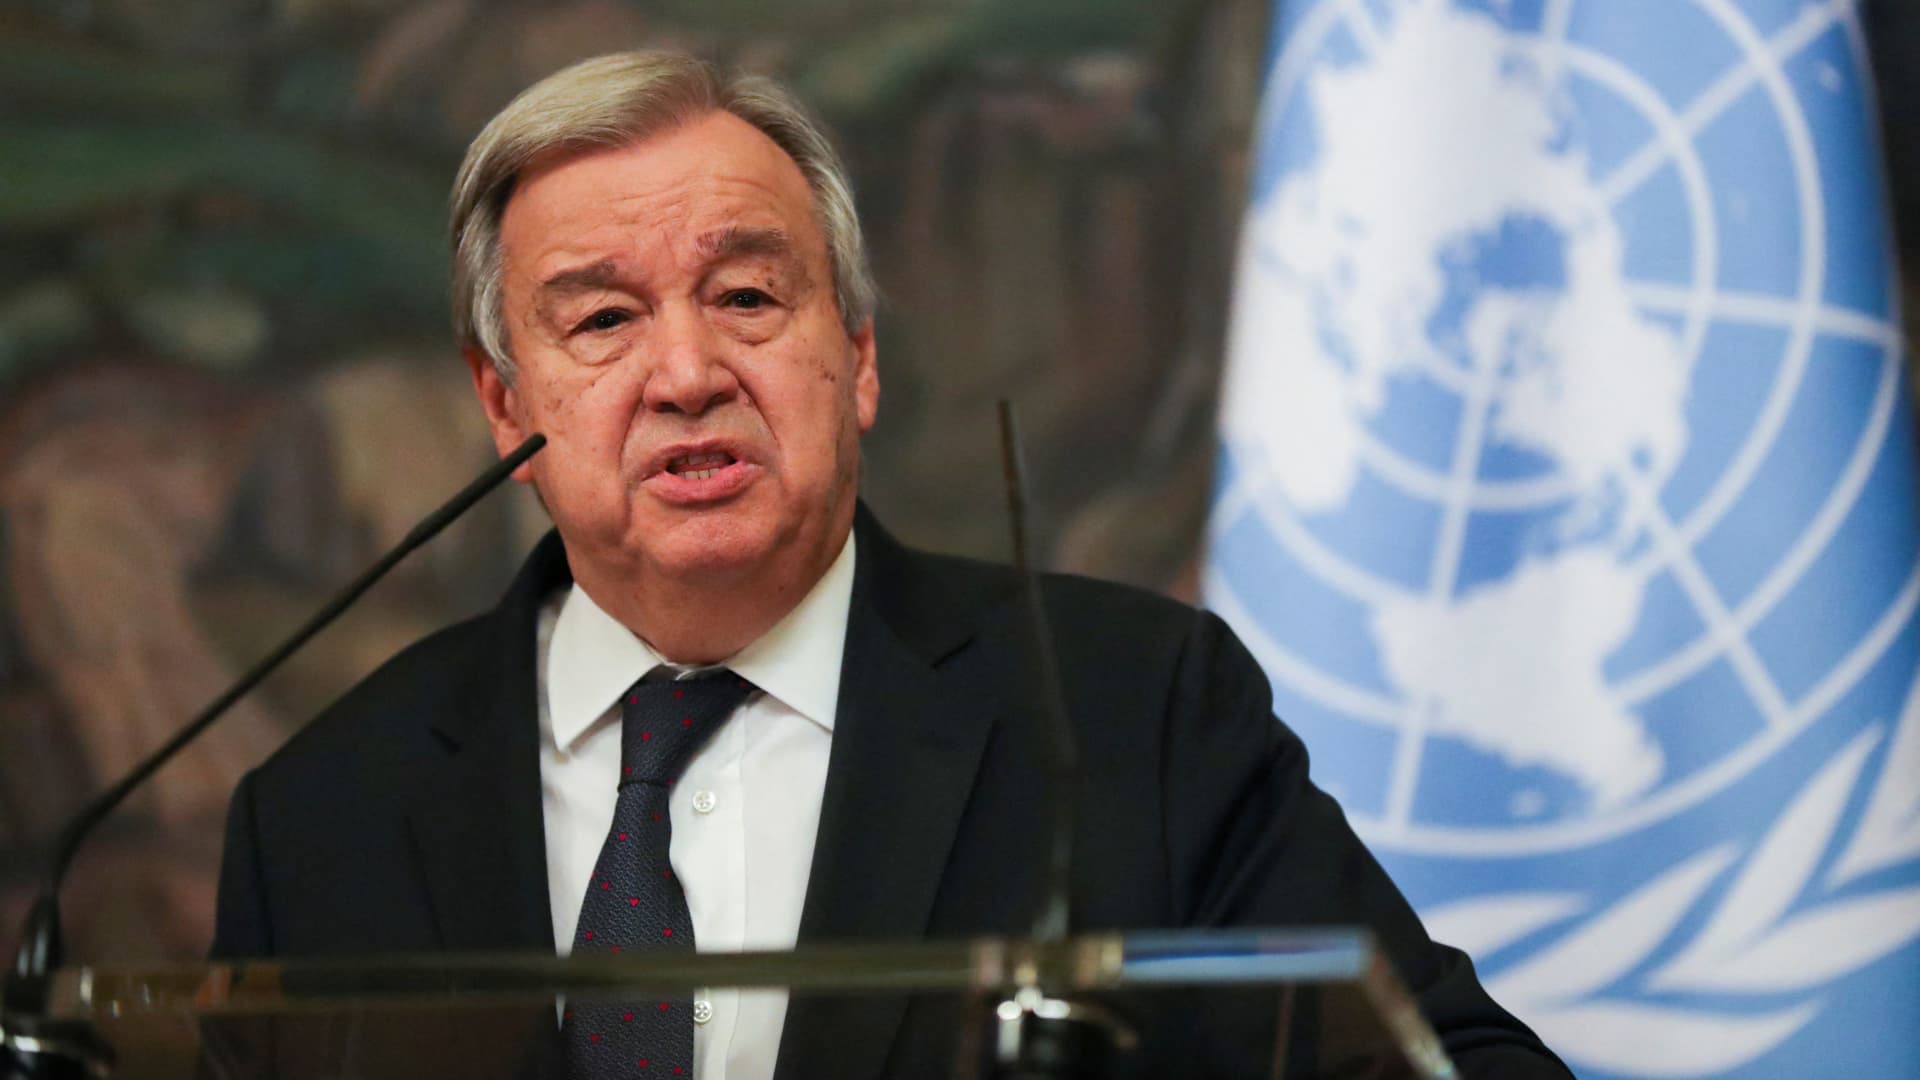 UN Secretary-General Antonio Guterres speaks during a news conference after his meeting with Russian Foreign Minister Sergei Lavrov in Moscow, Russia, April 26, 2022. 